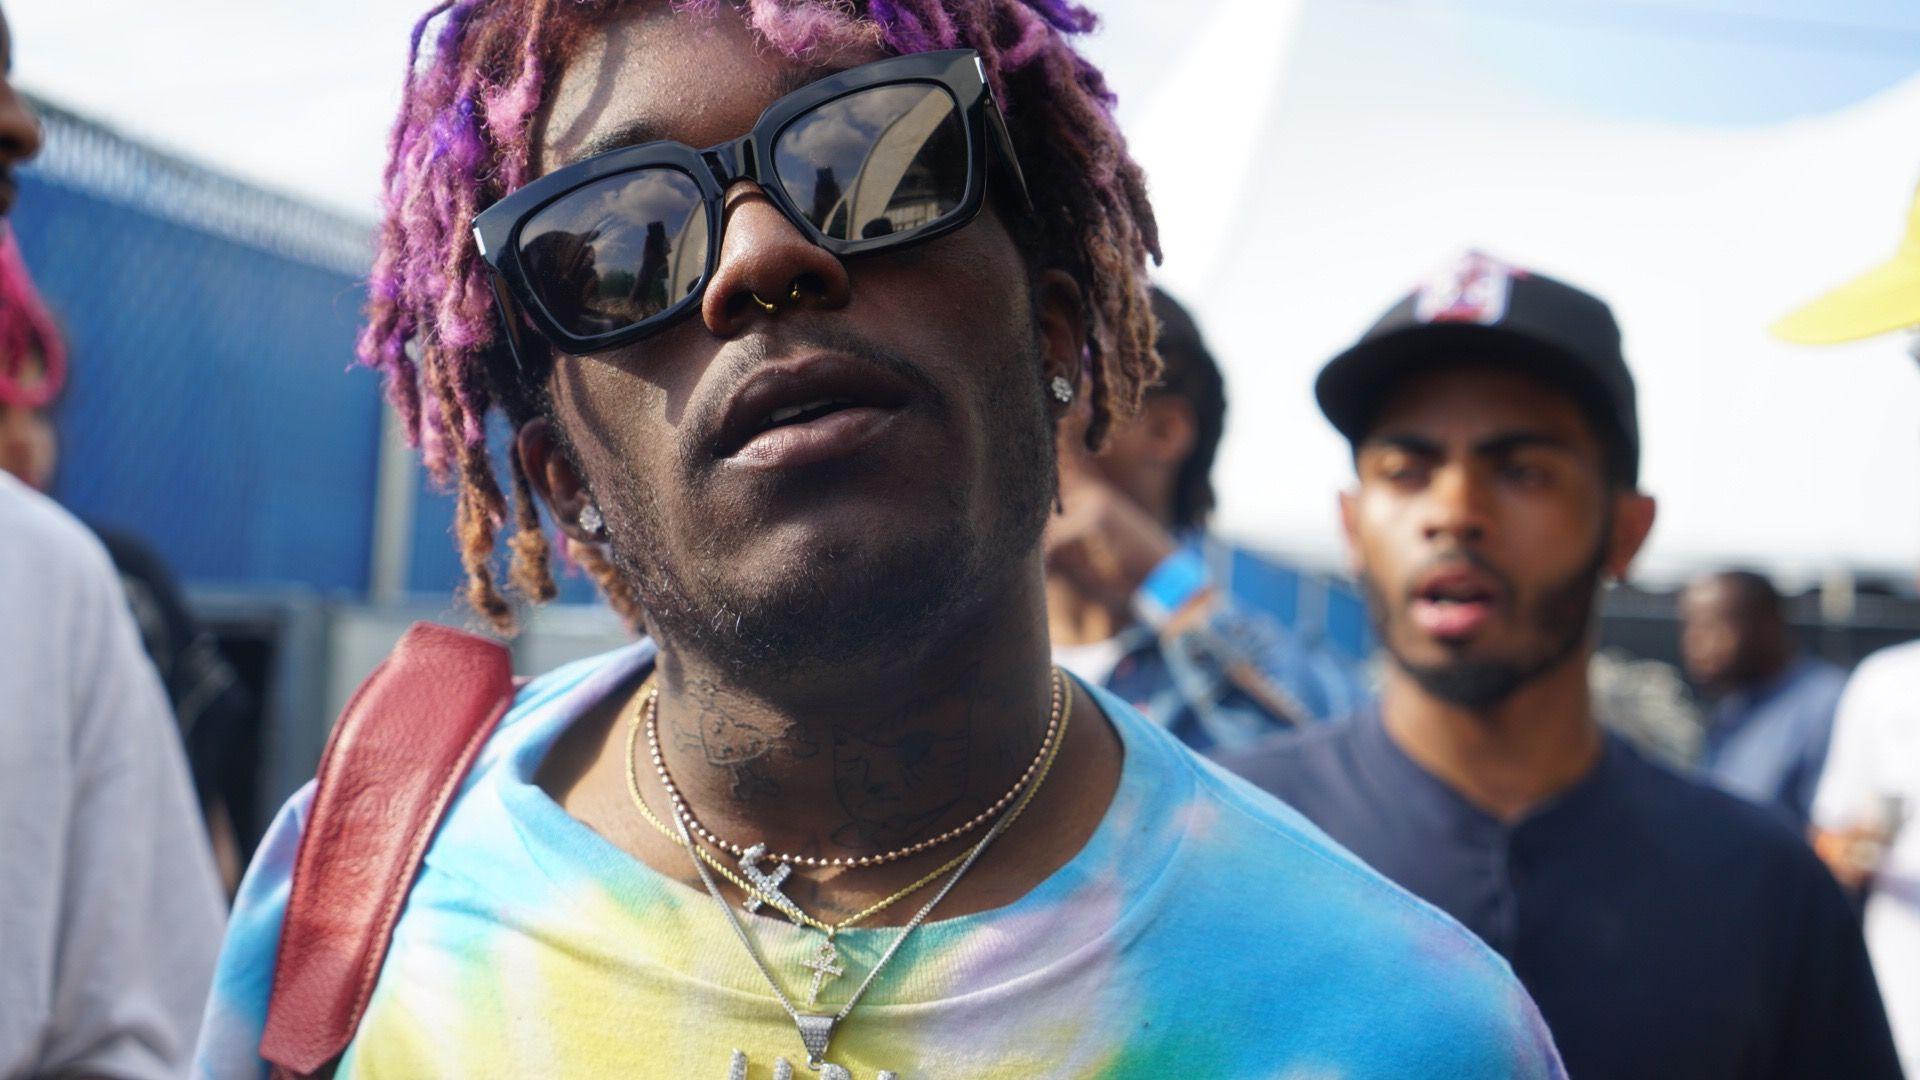 Lil Uzi Vert Wallpaper HD 1080p 2017 For PC, iPhone, Android